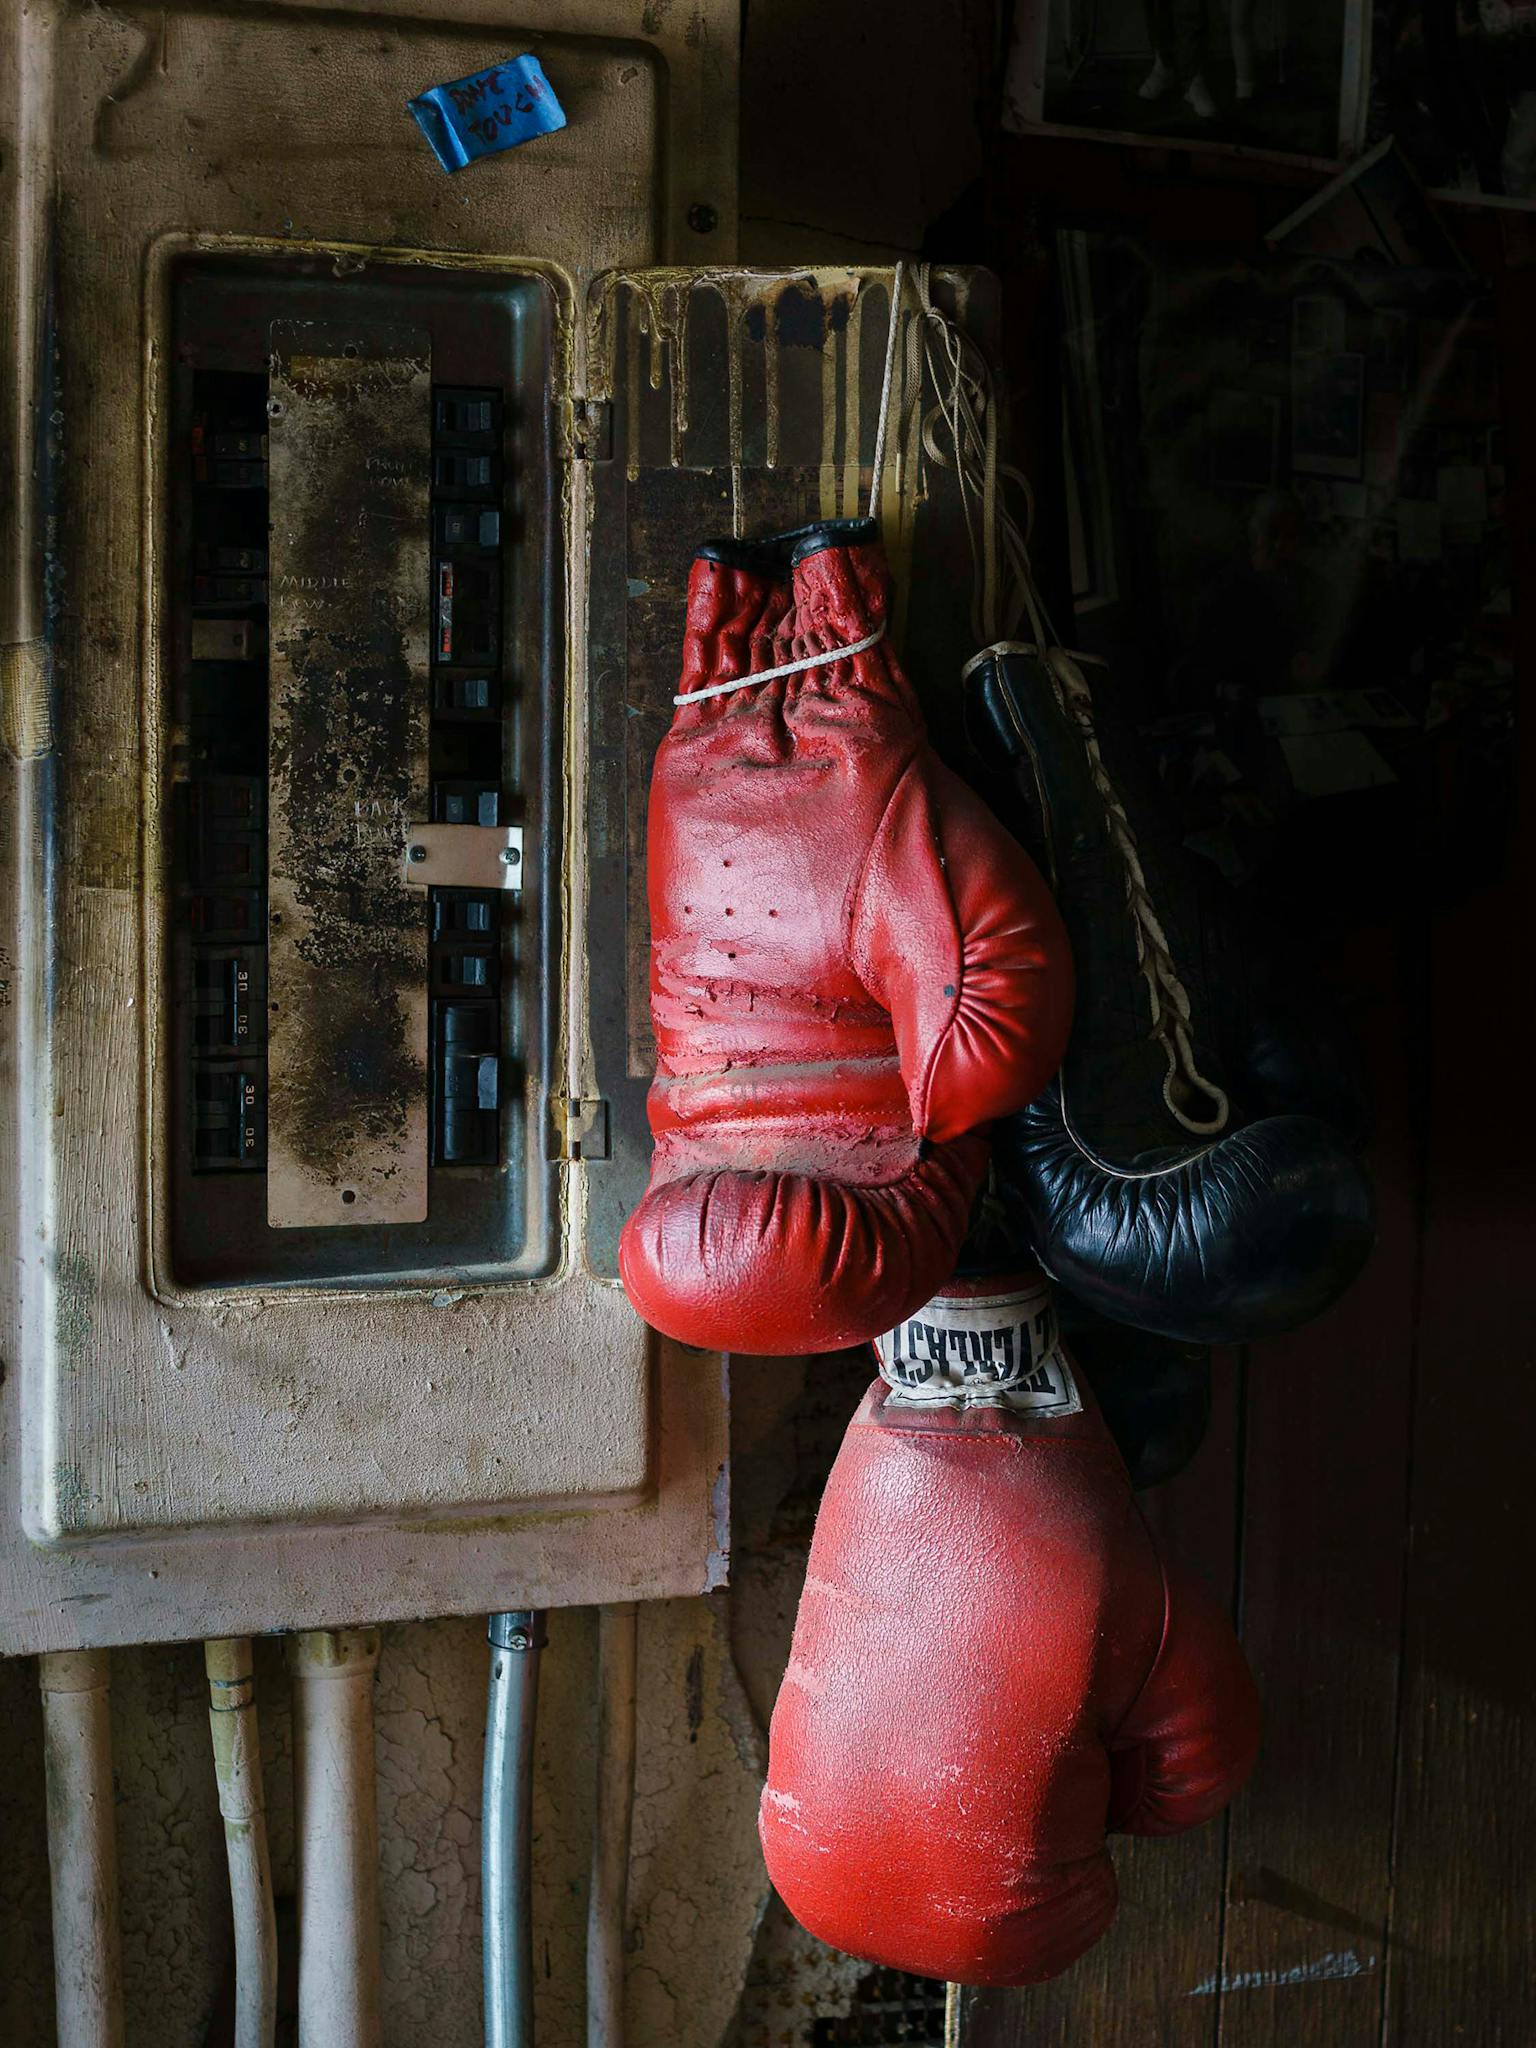 “This is pure Doug,” says Diamond, of the boxing gloves draped lazily over a fuse box that looks ready to short circuit. (The little blue note reads, “Don’t Touch.”) The fuse box clung to the wall of Eidd’s office, and the gloves never left their perch. The leather and metal, the paint drips and pipes, the intense dark shadows and the glint of light on leather give this picture the feel of a still-life painting.